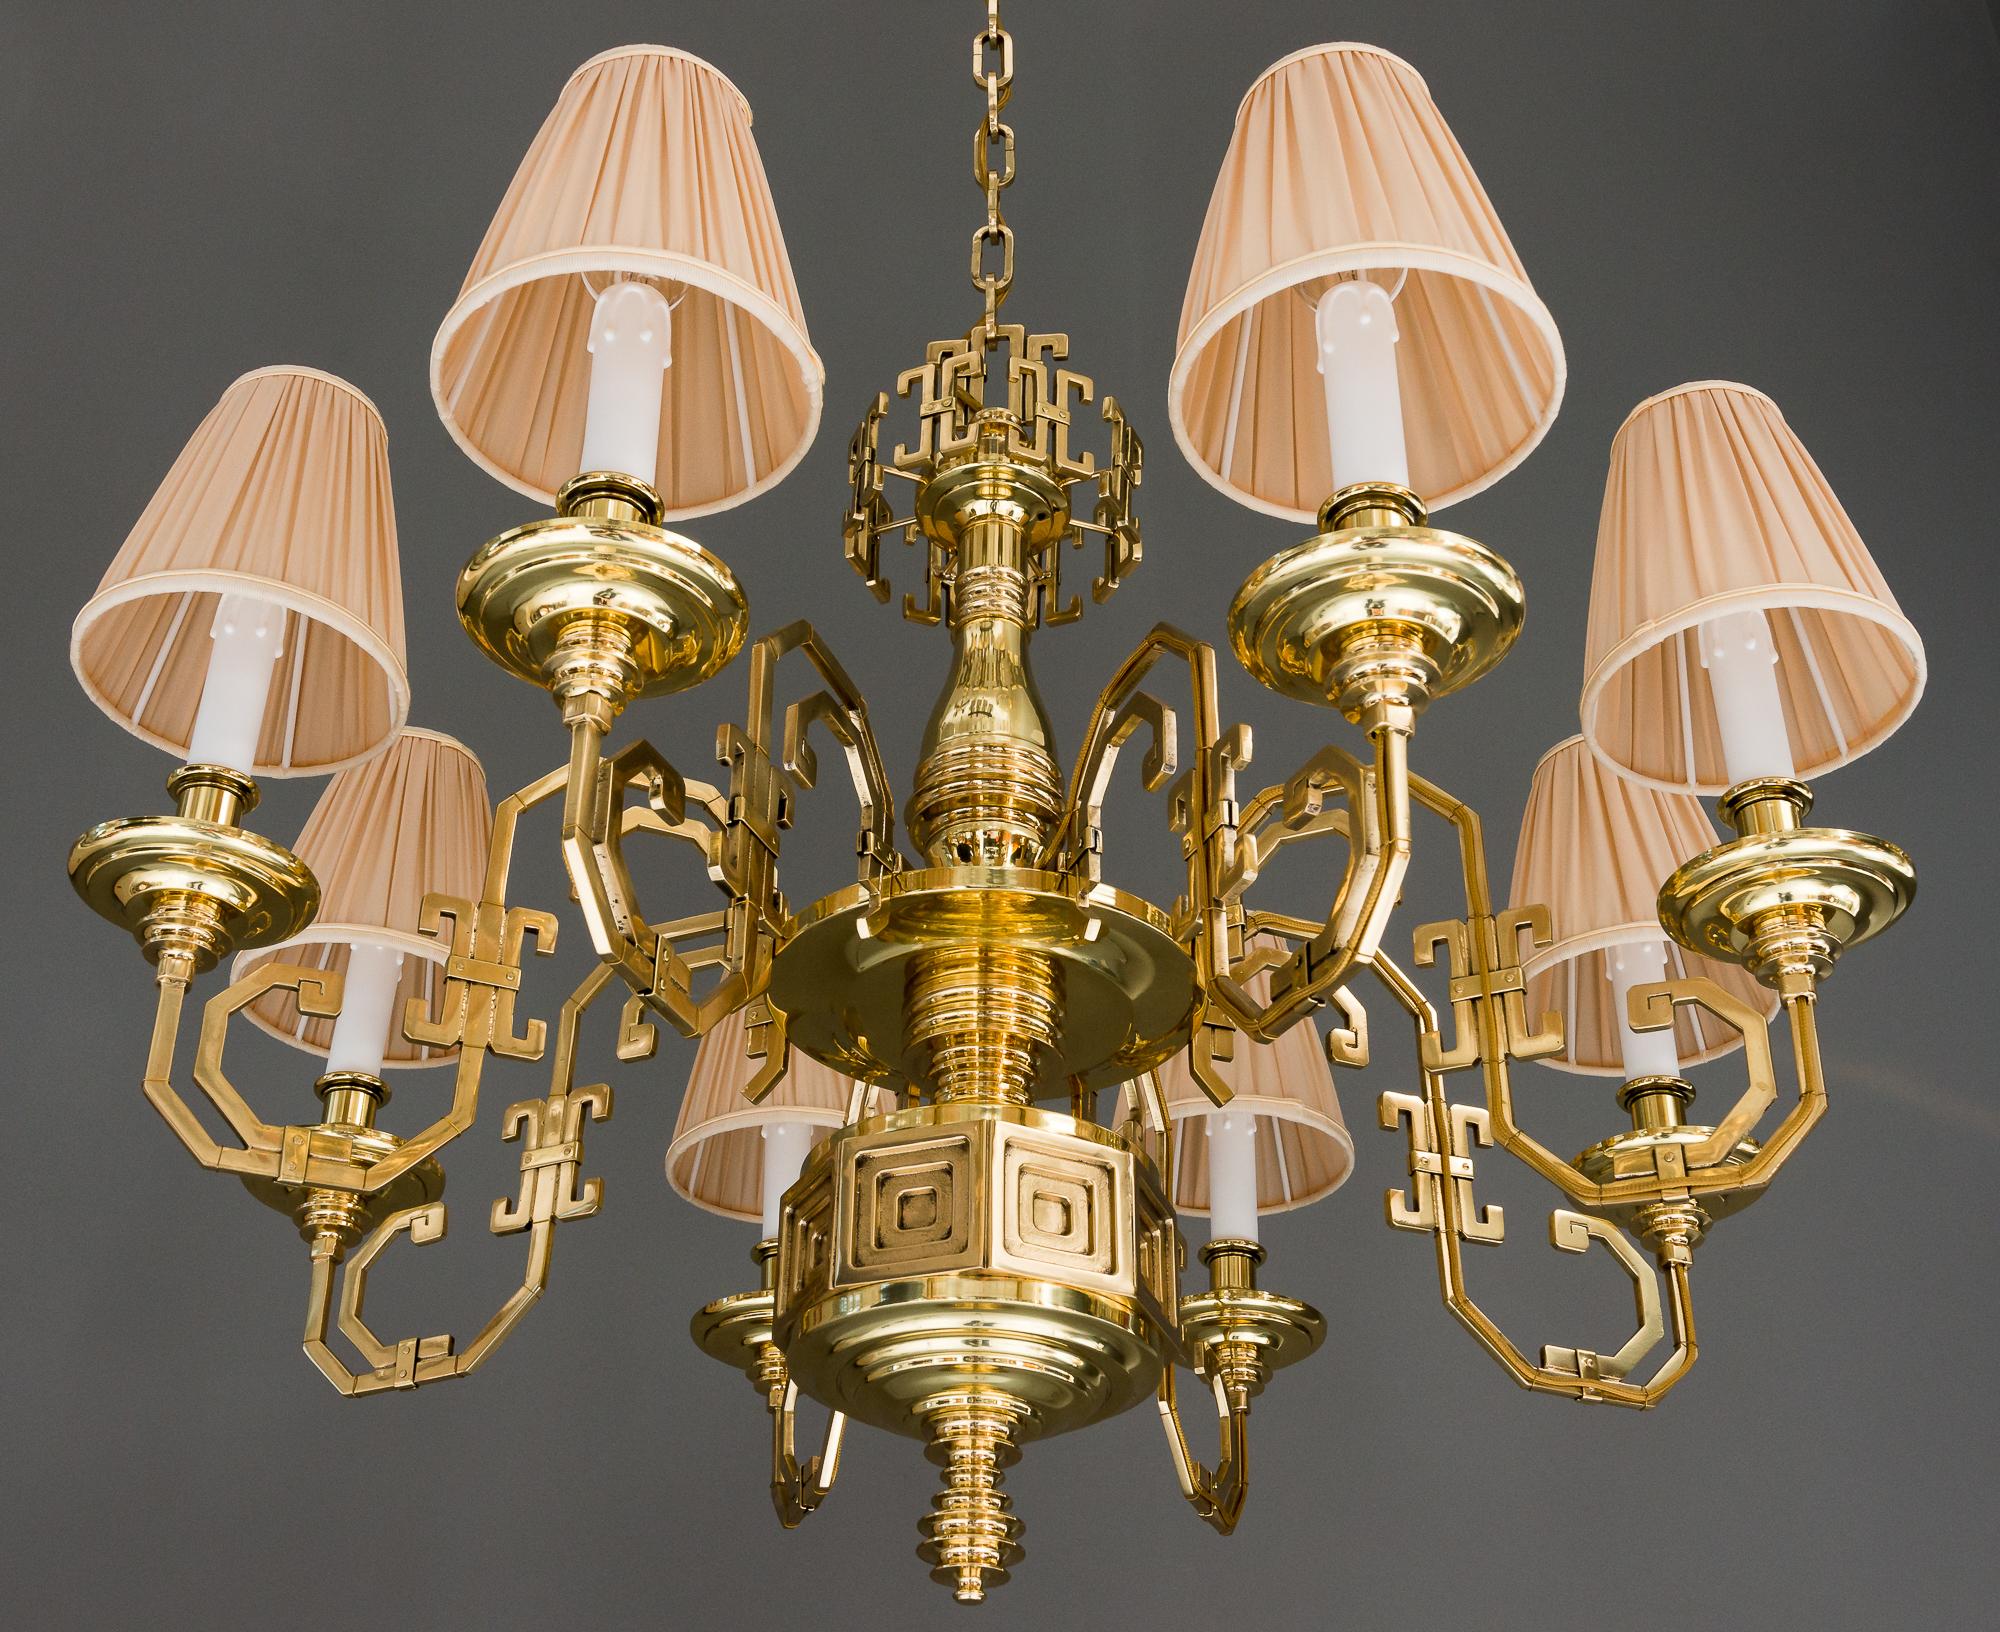 Big Gaetano Sciolari brass saloon chandelier, circa 1920s
Polished and stove enameled
Shades are replaced new.
Very rare and high quality chandelier.